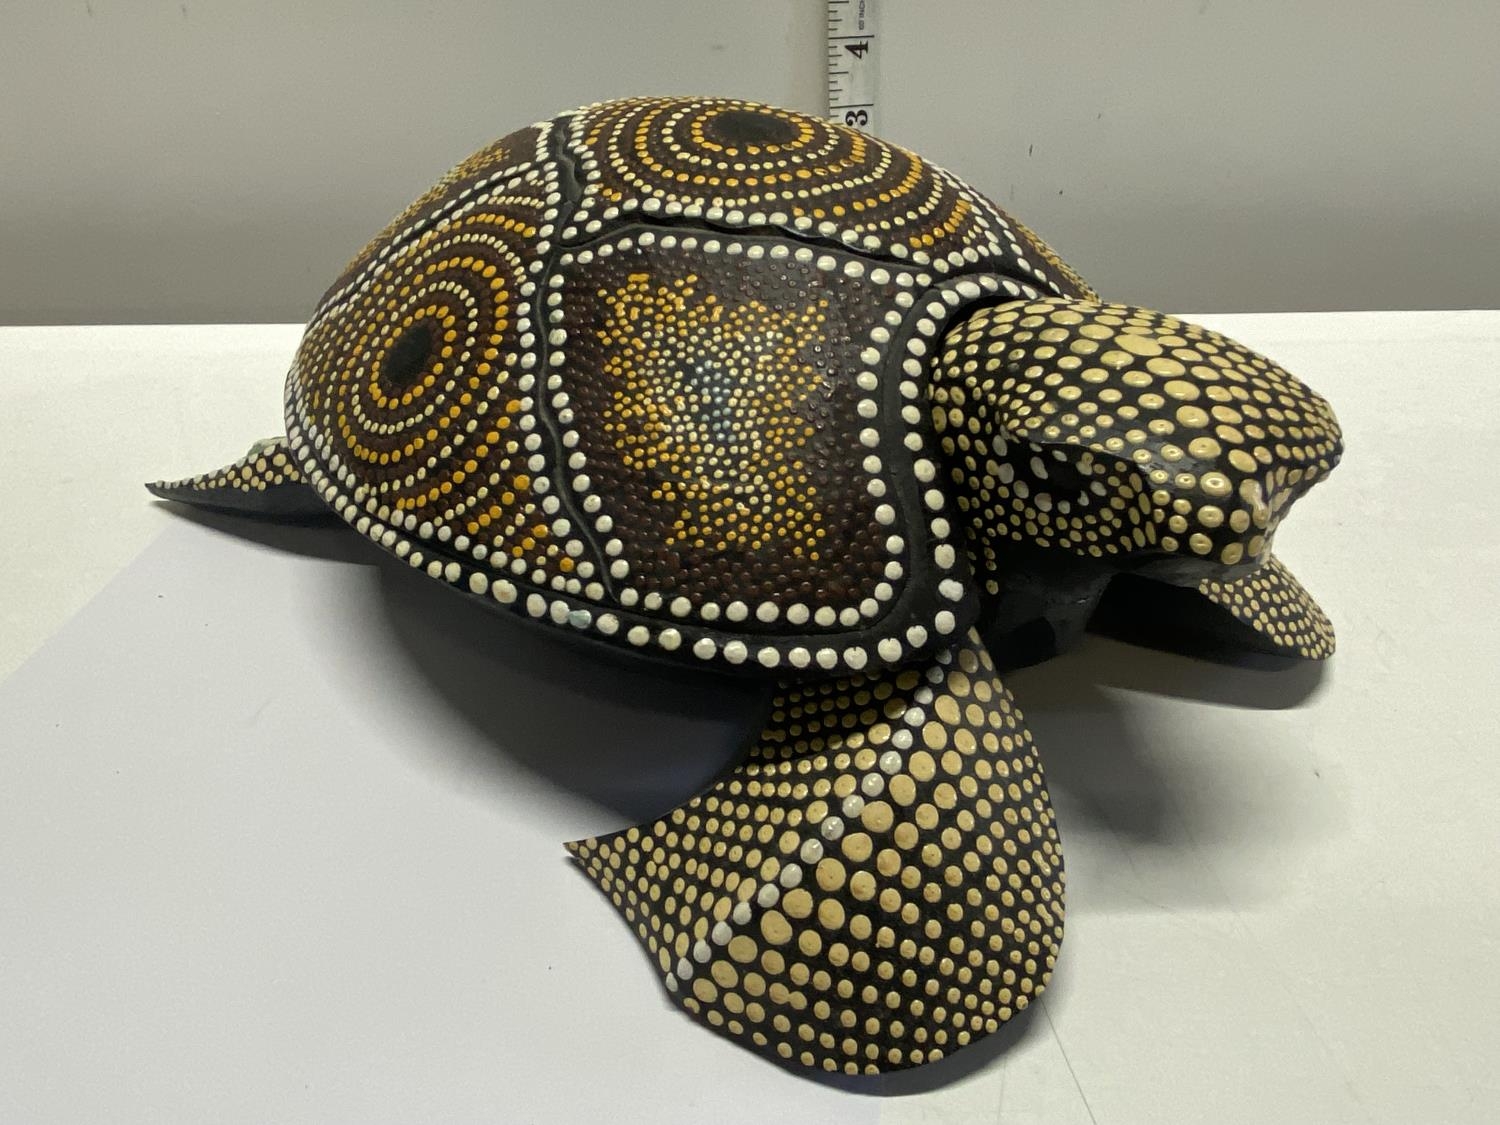 An unusual hand carved wooden turtle with applied decoration